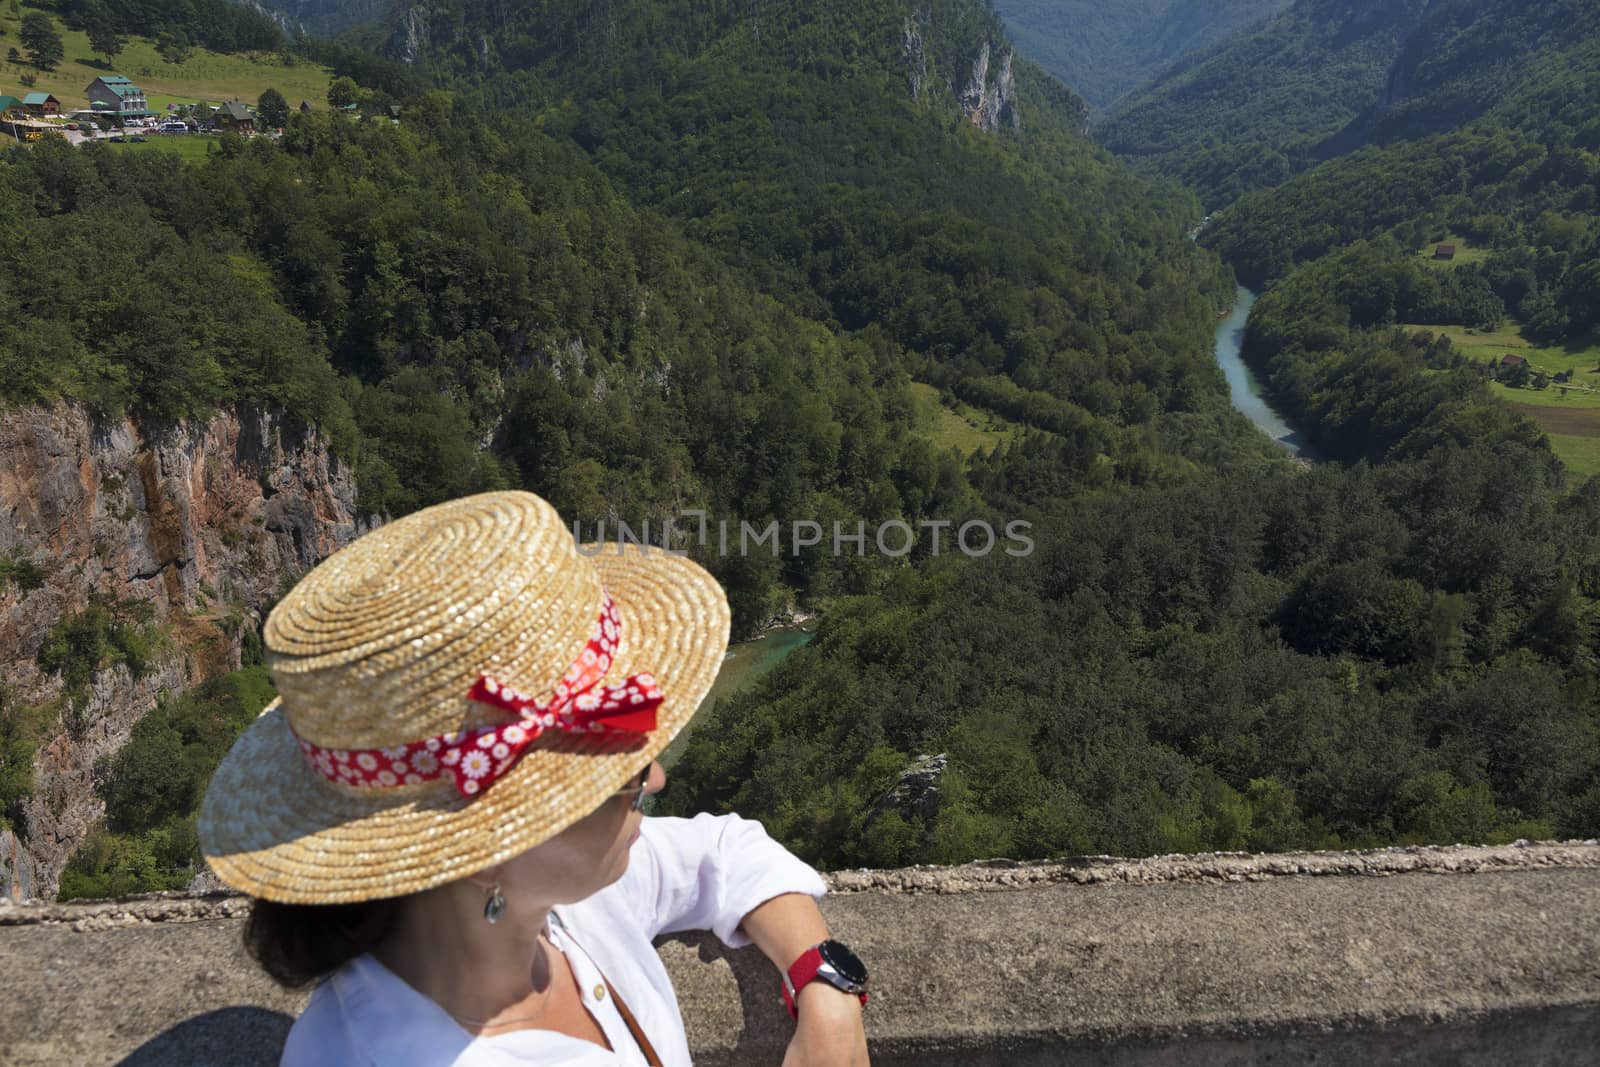 A young woman in a white blouse and straw hat watches the mountain river flowing among the stone gorge.